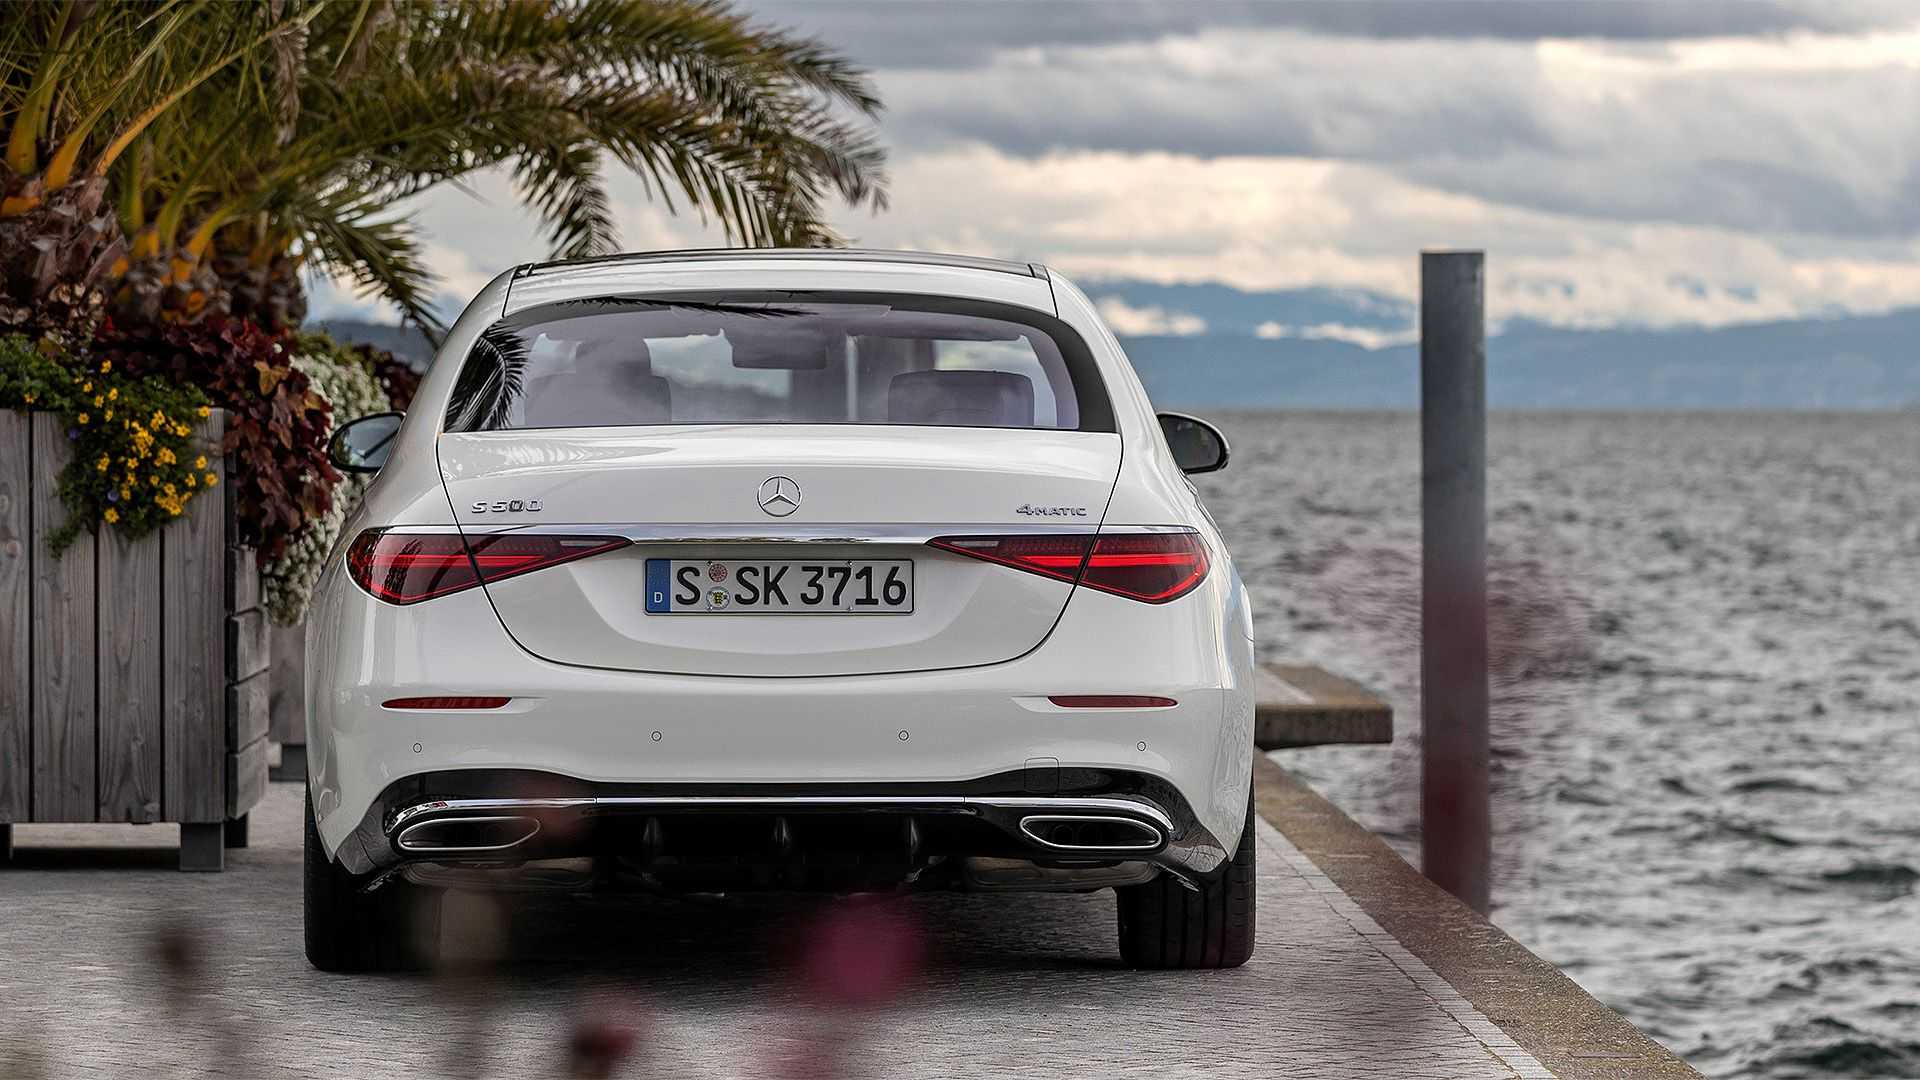 2020 MercedesBenz SClass Hybrid Review Trims Specs Price New  Interior Features Exterior Design and Specifications  CarBuzz